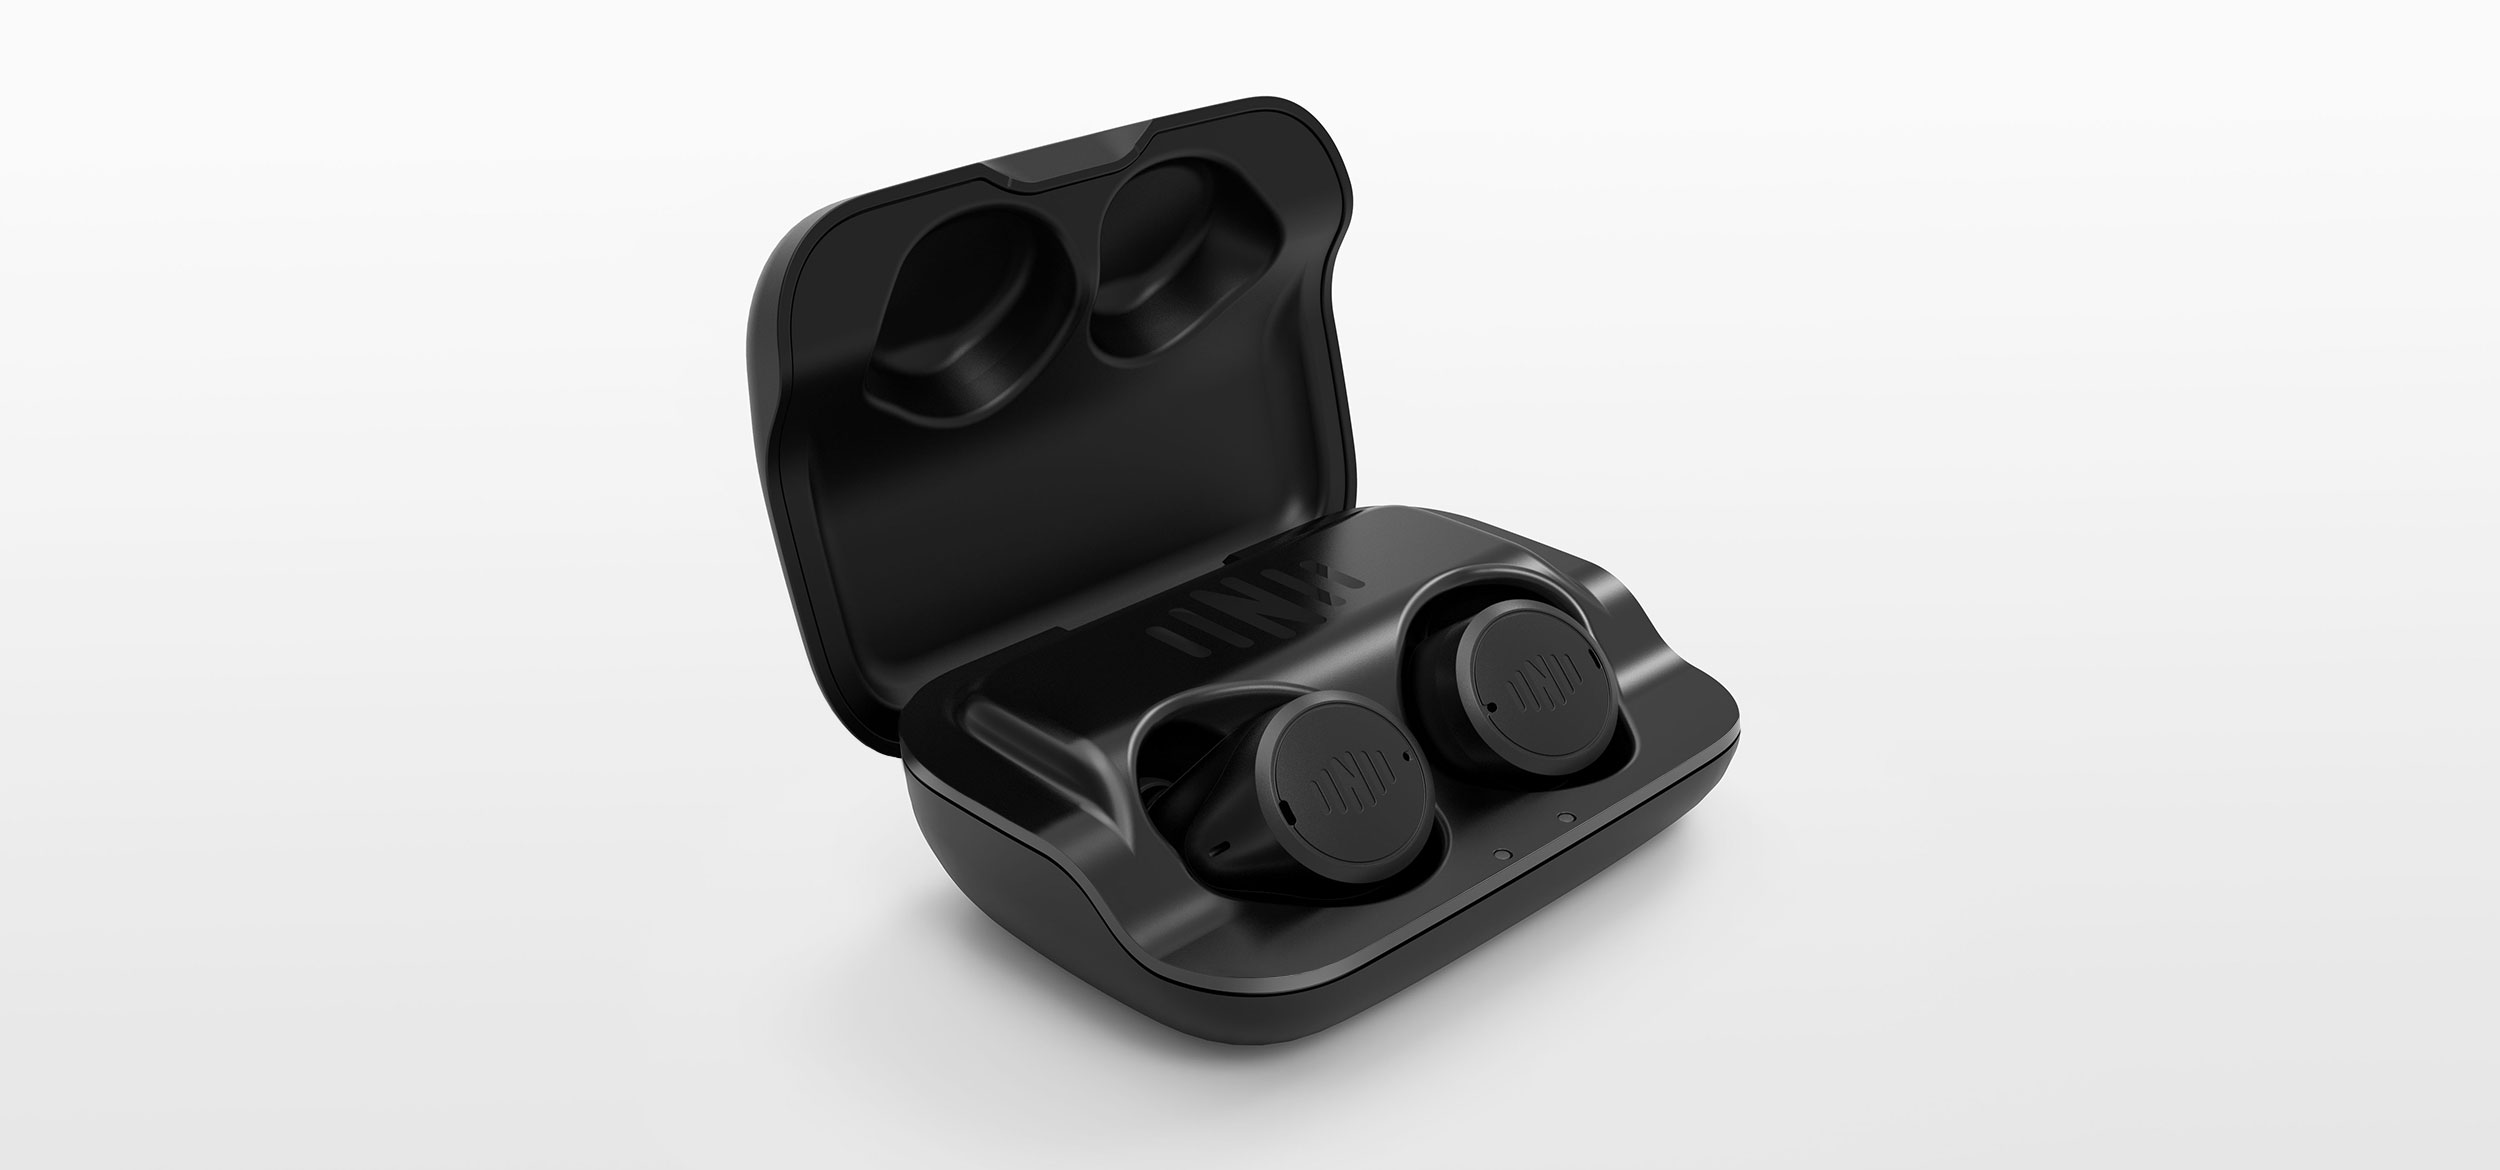 Nuheara IQ Buds Max 2 Earbud Case in Open Position revealing Earbuds